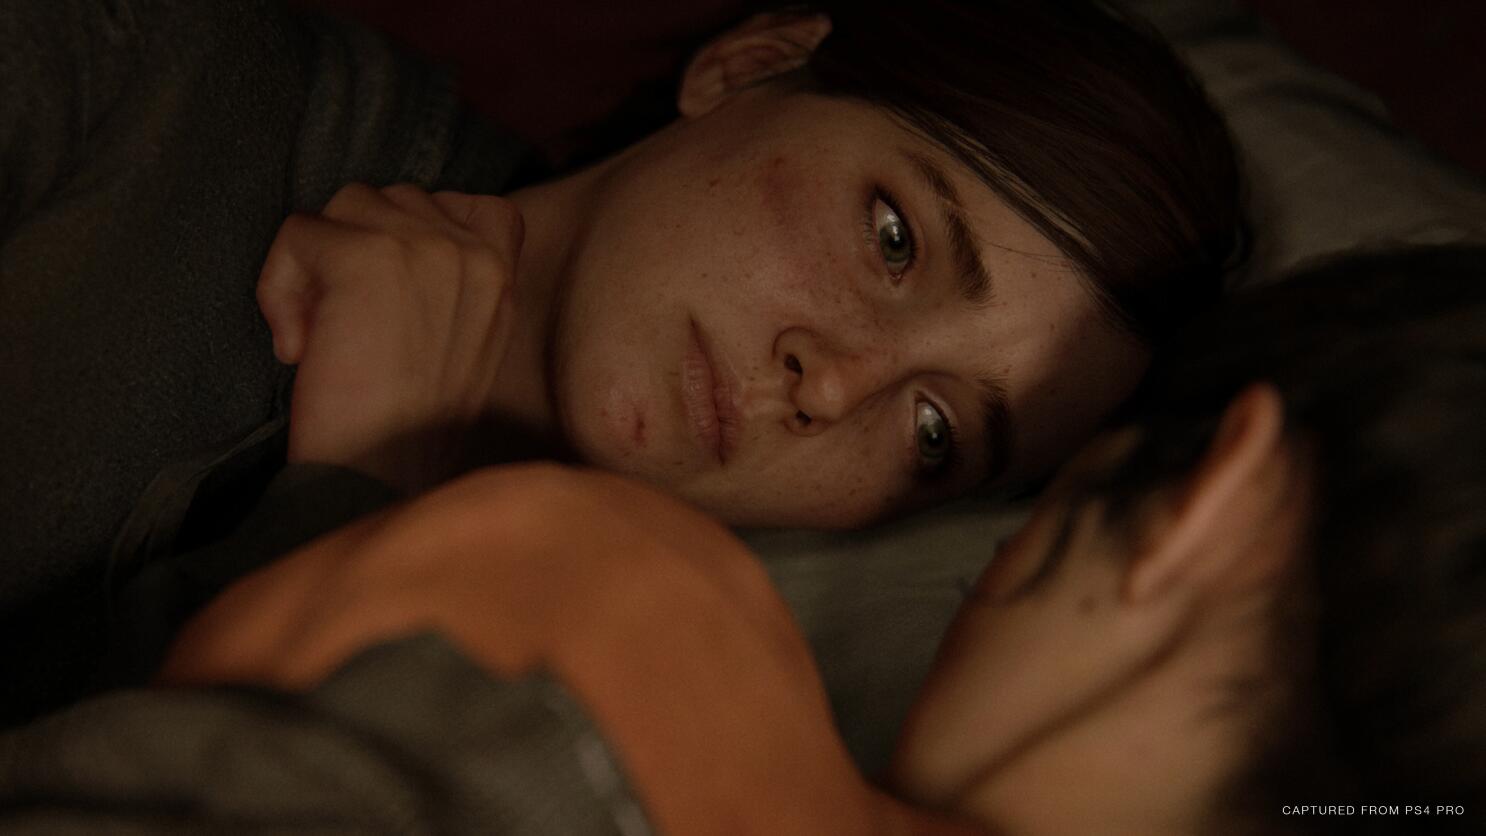 Ellie descends further into darkness in The Last of Us Part II